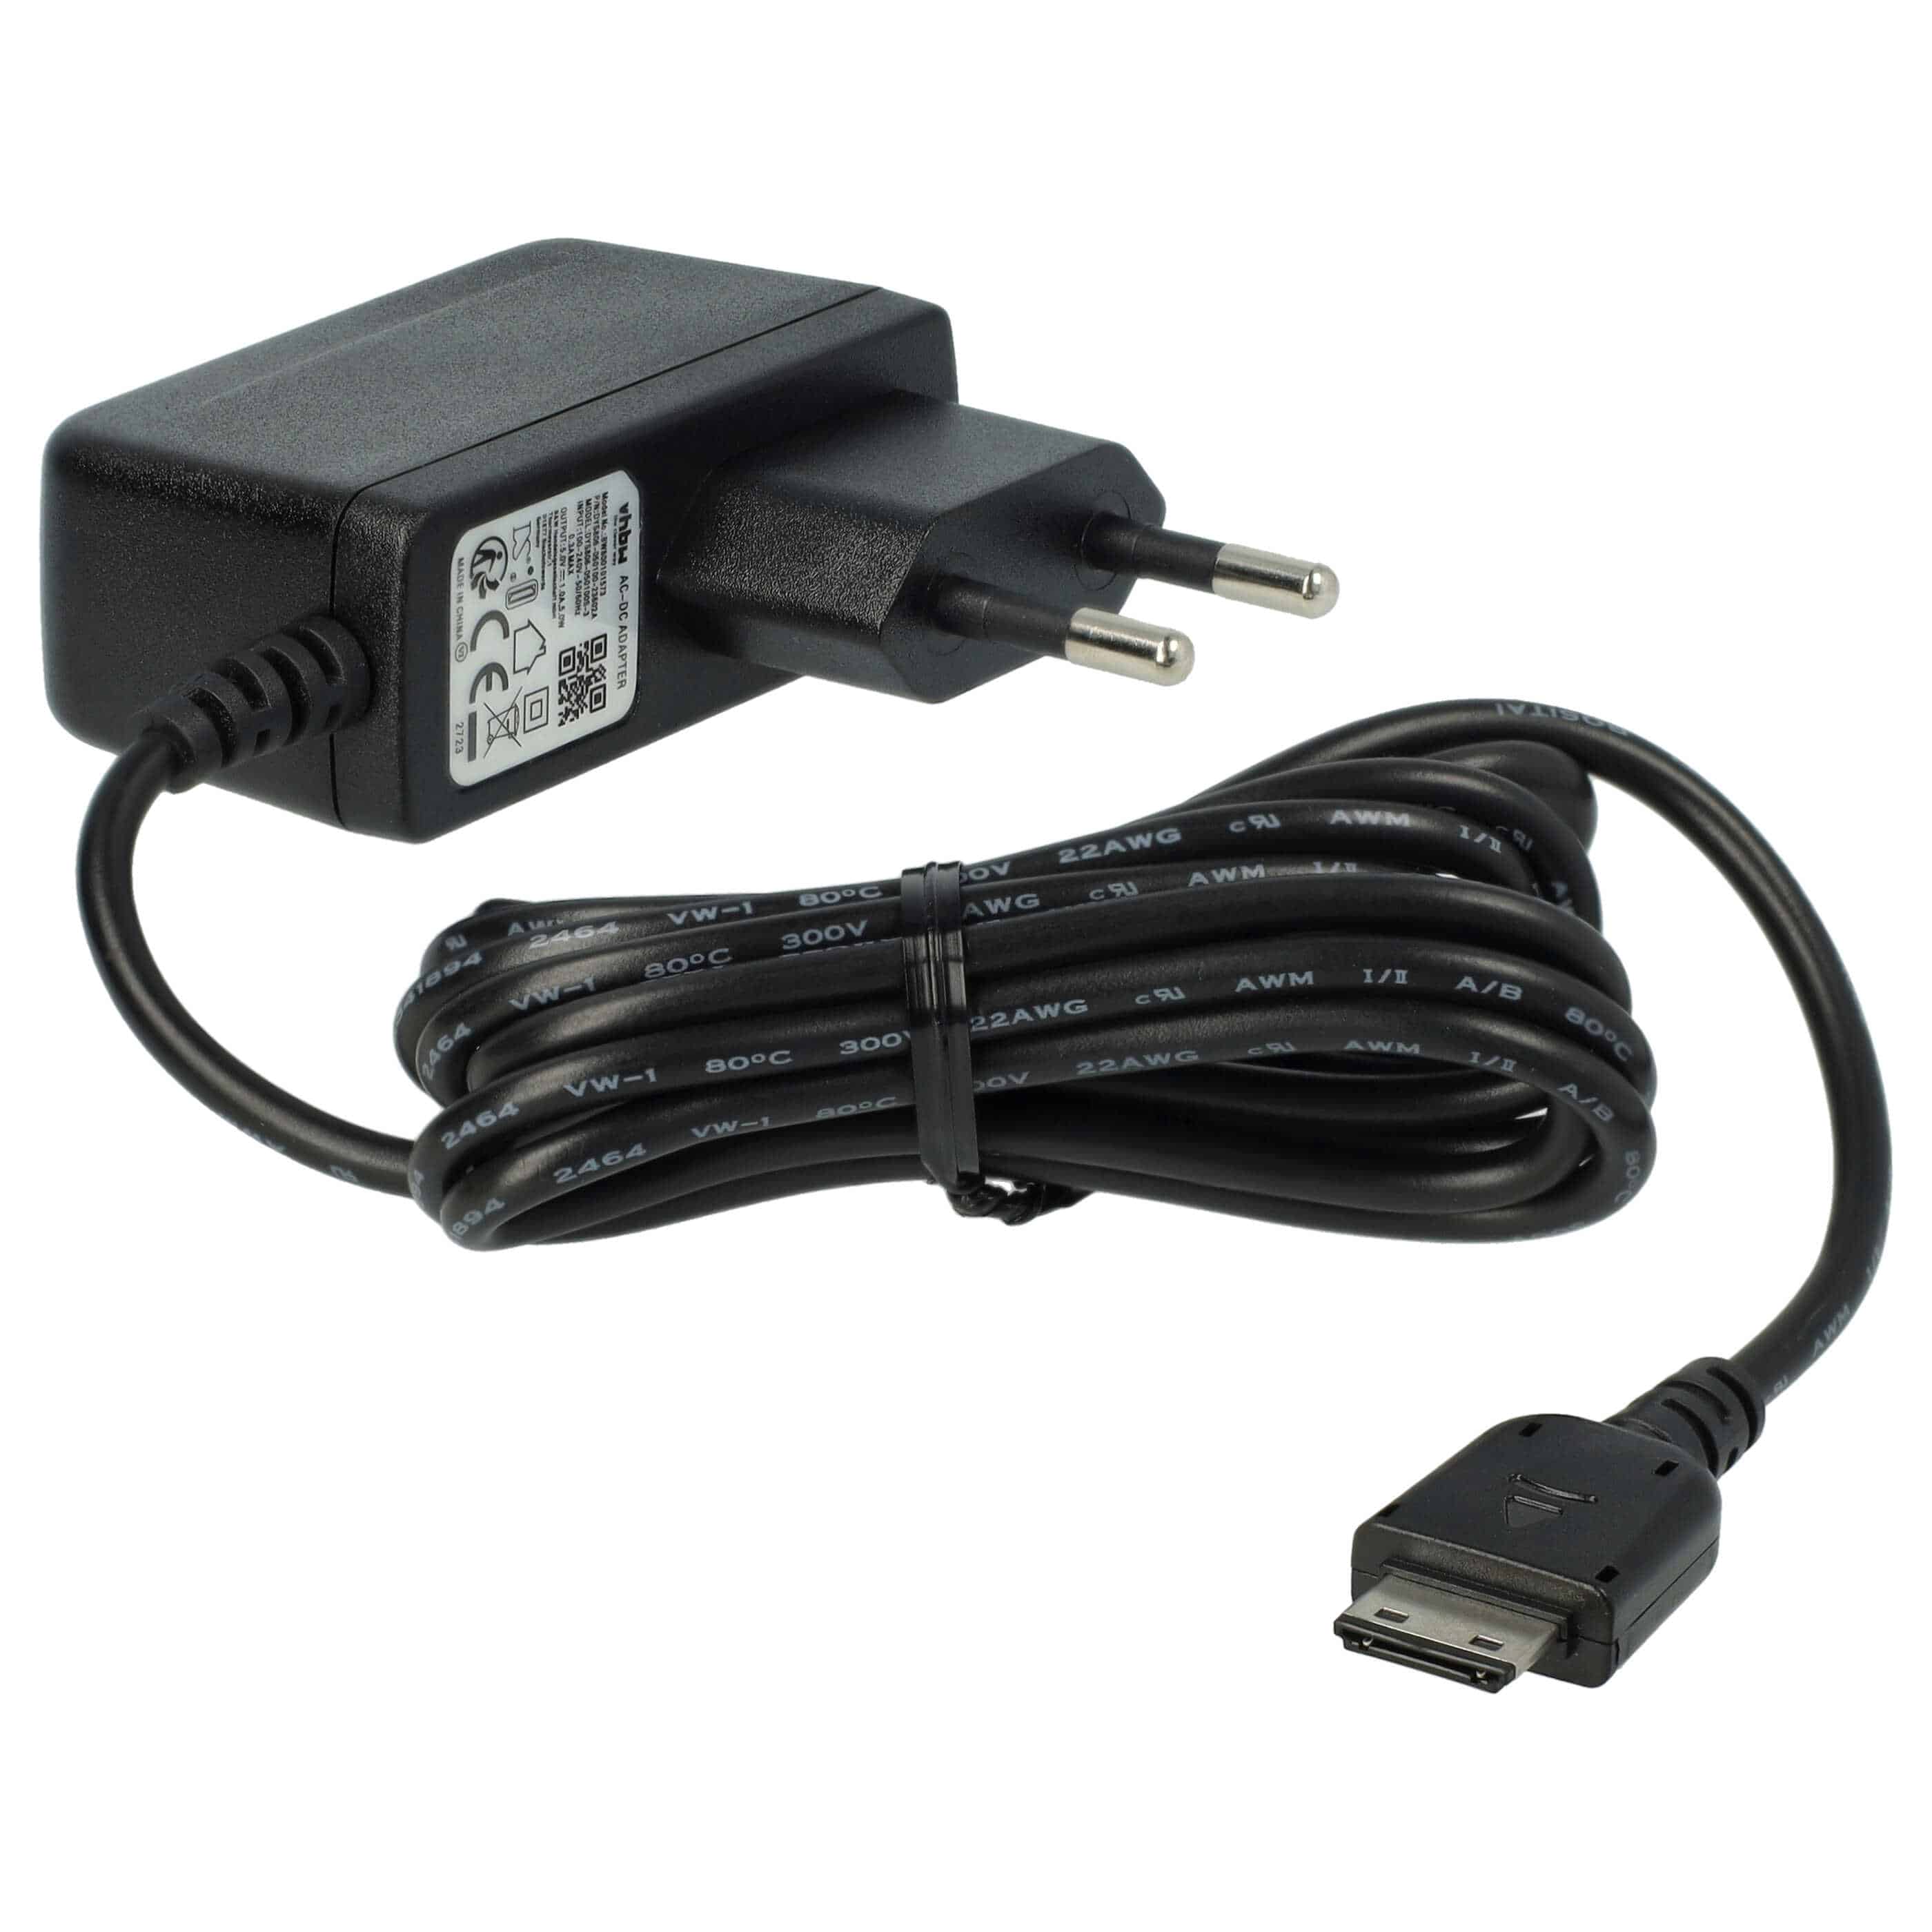 Charger for Samsung B130Mobile Phone